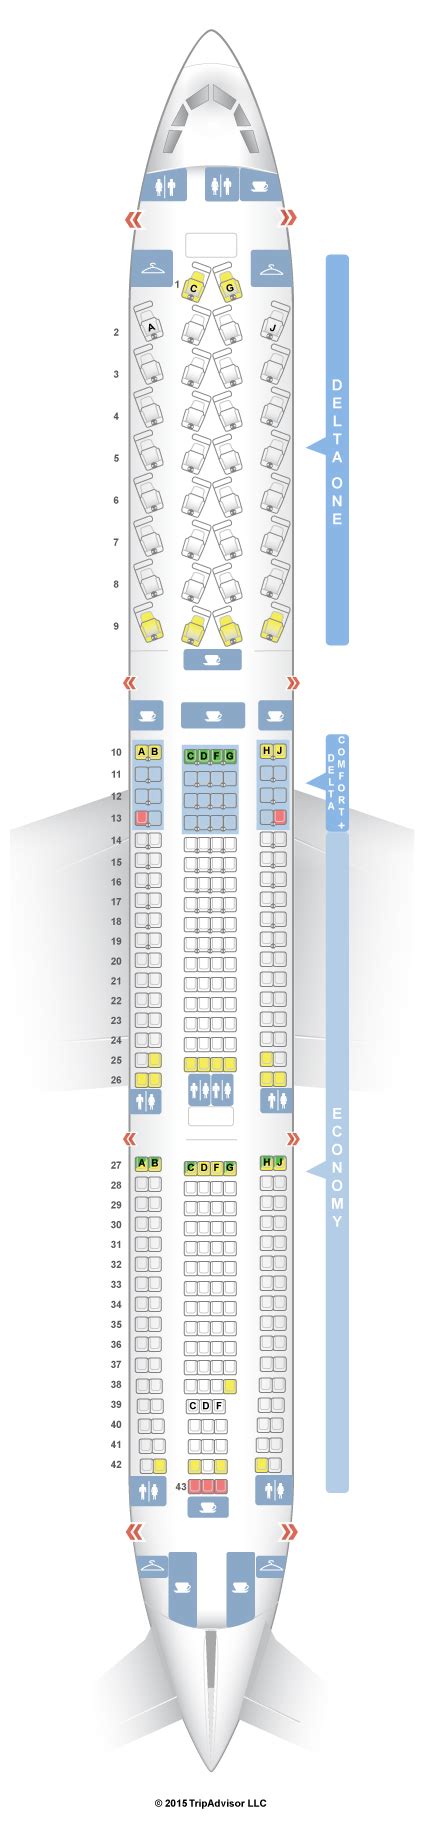 Delta Airbus A330 300 Seating Map